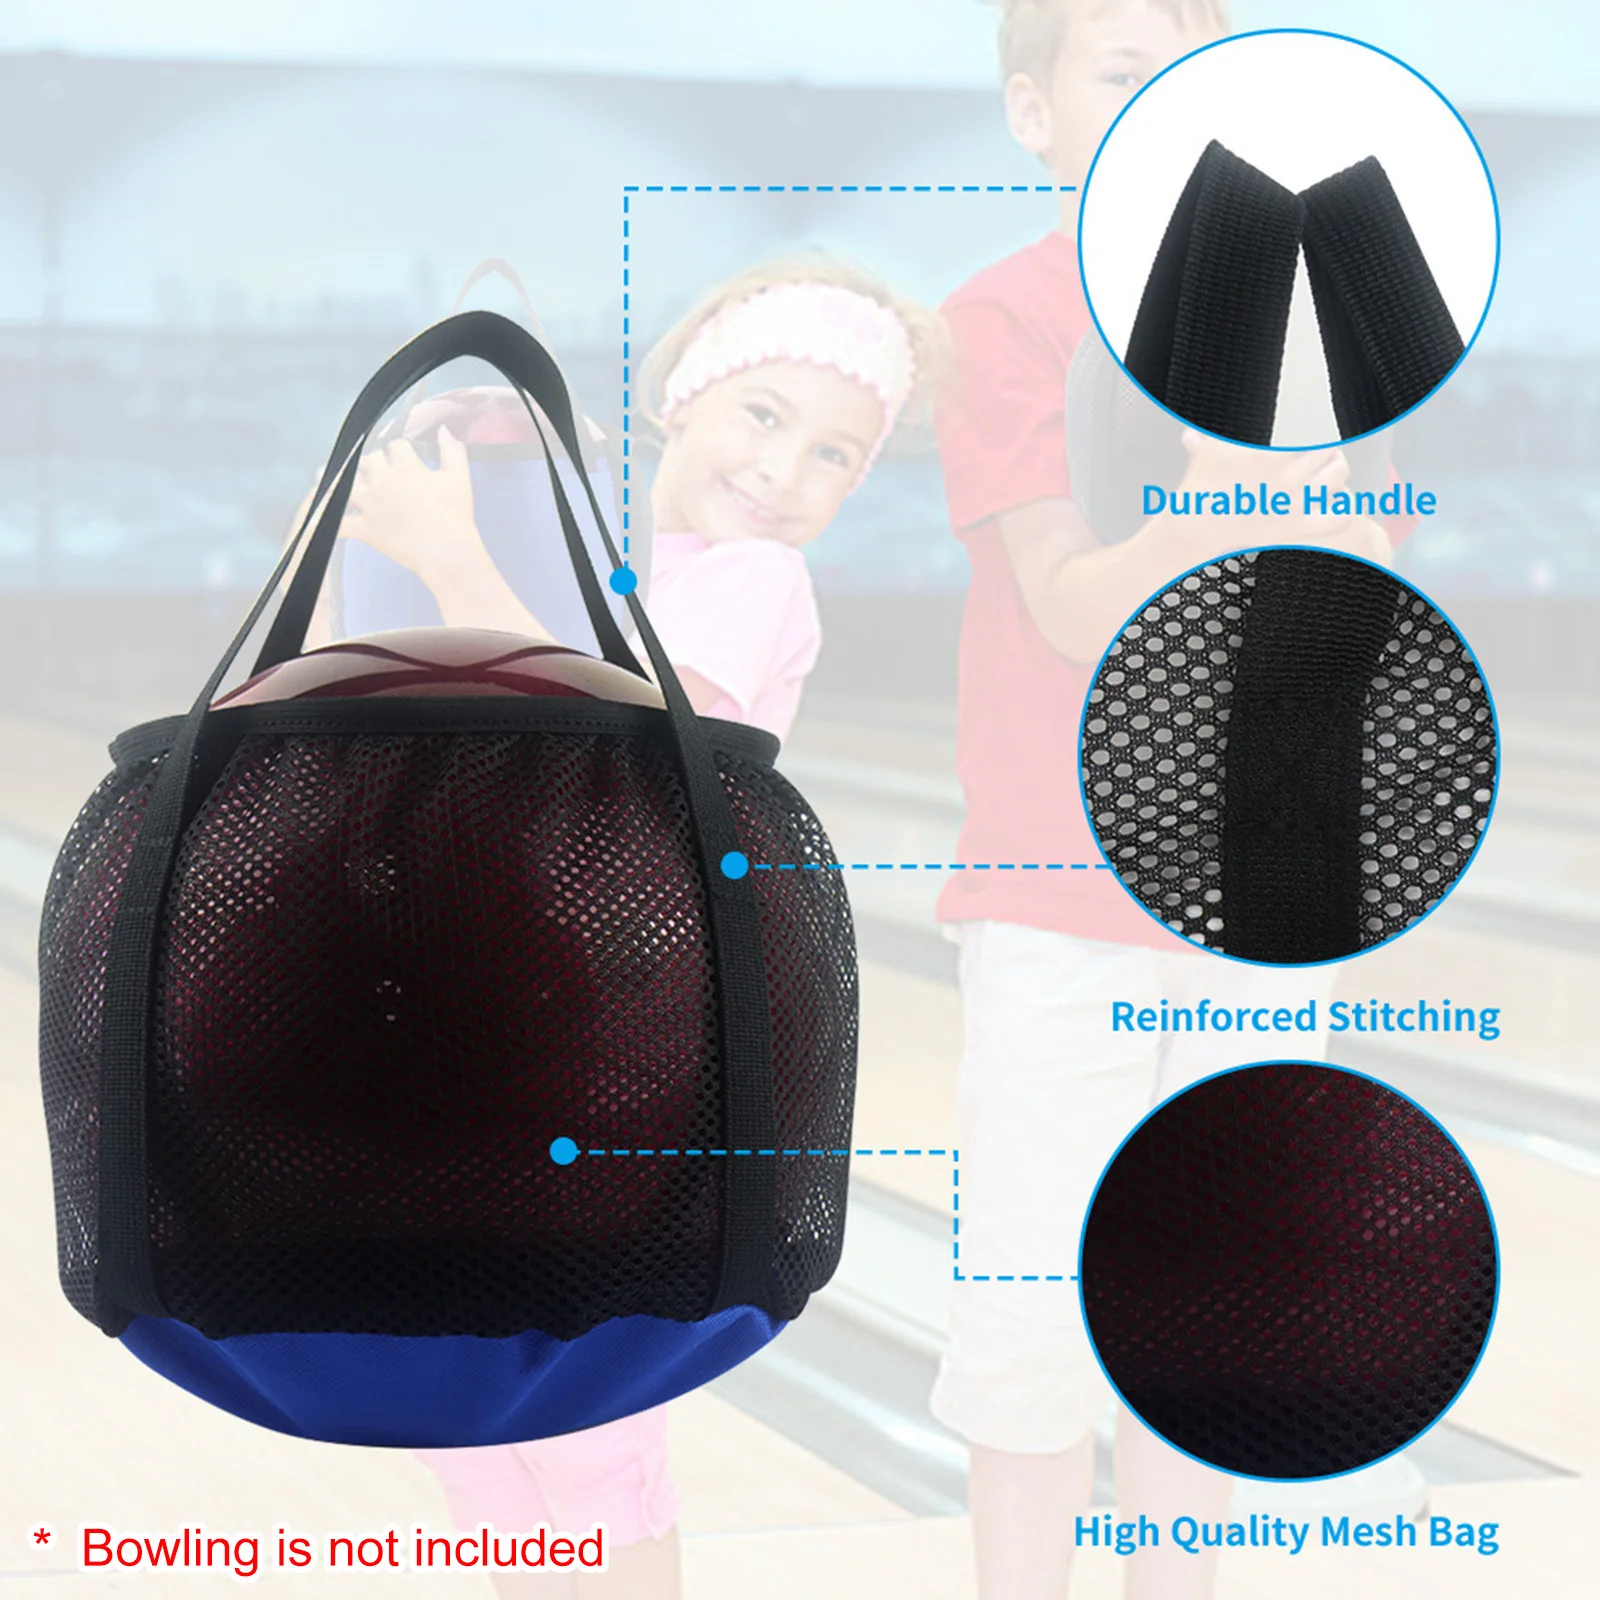 Convenient Bowling Bag Sticky Design As Shown Single Bowling Tote Bag Bowling Rack Small Items Bowling Tote Bag storage rack portrait neck rack earring storage rack simple design thickened necklace rack exquisite jewelry display props